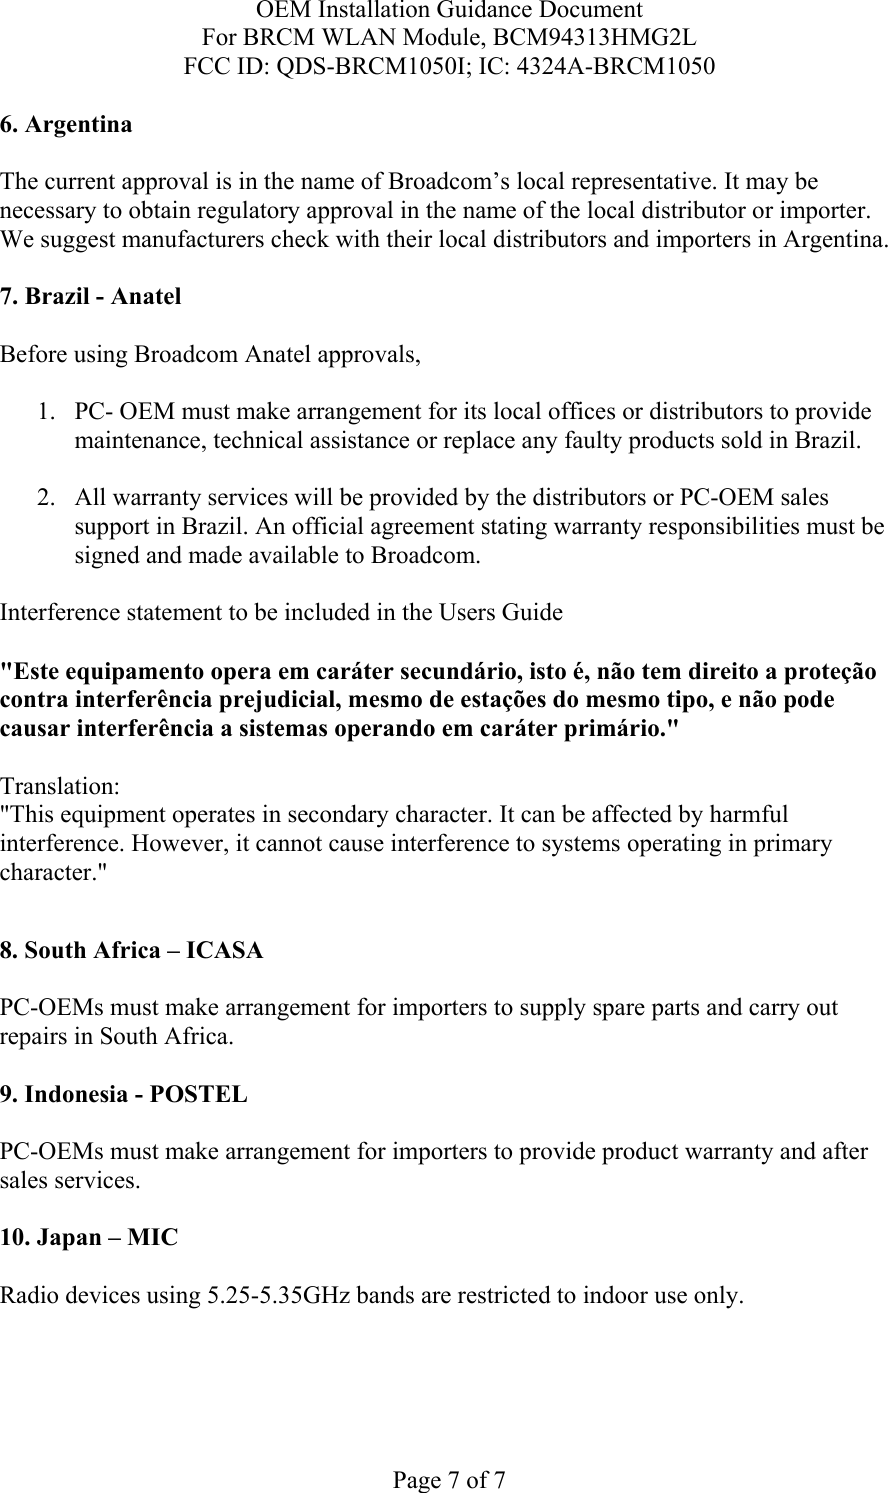 OEM Installation Guidance Document For BRCM WLAN Module, BCM94313HMG2L FCC ID: QDS-BRCM1050I; IC: 4324A-BRCM1050  Page 7 of 7 6. Argentina   The current approval is in the name of Broadcom’s local representative. It may be necessary to obtain regulatory approval in the name of the local distributor or importer. We suggest manufacturers check with their local distributors and importers in Argentina.  7. Brazil - Anatel   Before using Broadcom Anatel approvals,   1. PC- OEM must make arrangement for its local offices or distributors to provide maintenance, technical assistance or replace any faulty products sold in Brazil.   2. All warranty services will be provided by the distributors or PC-OEM sales support in Brazil. An official agreement stating warranty responsibilities must be signed and made available to Broadcom.   Interference statement to be included in the Users Guide &quot;Este equipamento opera em caráter secundário, isto é, não tem direito a proteção contra interferência prejudicial, mesmo de estações do mesmo tipo, e não pode causar interferência a sistemas operando em caráter primário.&quot; Translation:  &quot;This equipment operates in secondary character. It can be affected by harmful interference. However, it cannot cause interference to systems operating in primary character.&quot;    8. South Africa – ICASA  PC-OEMs must make arrangement for importers to supply spare parts and carry out repairs in South Africa.  9. Indonesia - POSTEL  PC-OEMs must make arrangement for importers to provide product warranty and after sales services.   10. Japan – MIC  Radio devices using 5.25-5.35GHz bands are restricted to indoor use only.  